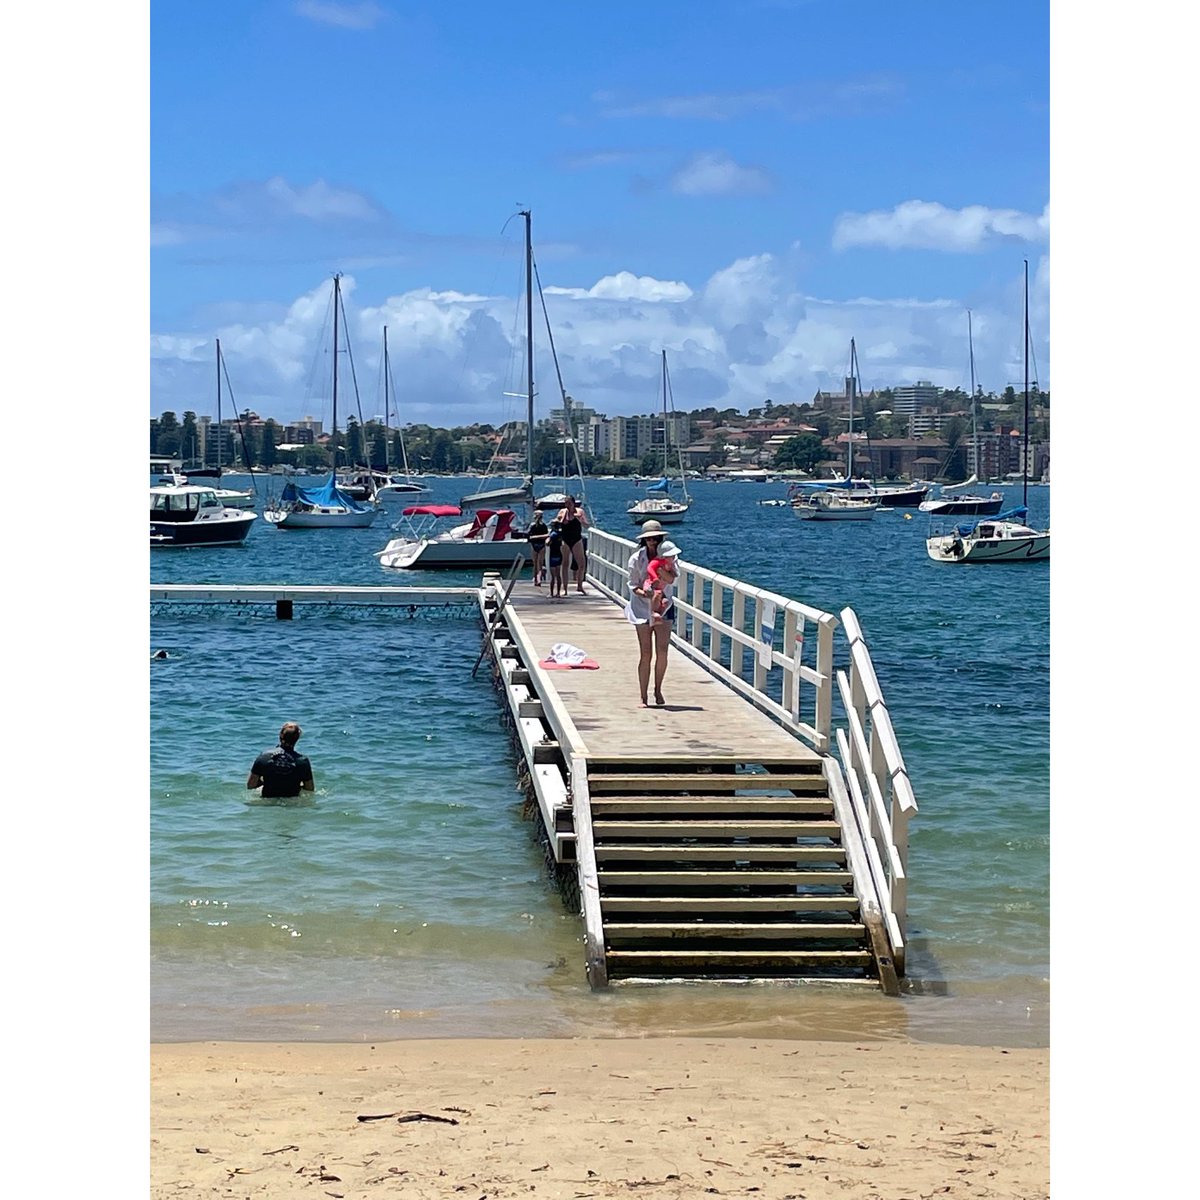 Let’s look at #harbourpools, like their kindred #oceanpools, essential #publicsydney - infrastructure to enjoy our climate & beautiful waterways.
Used to be more, & more spectacular pools around harbour foreshore.
With growing population & temperatures, high time for renaissance!